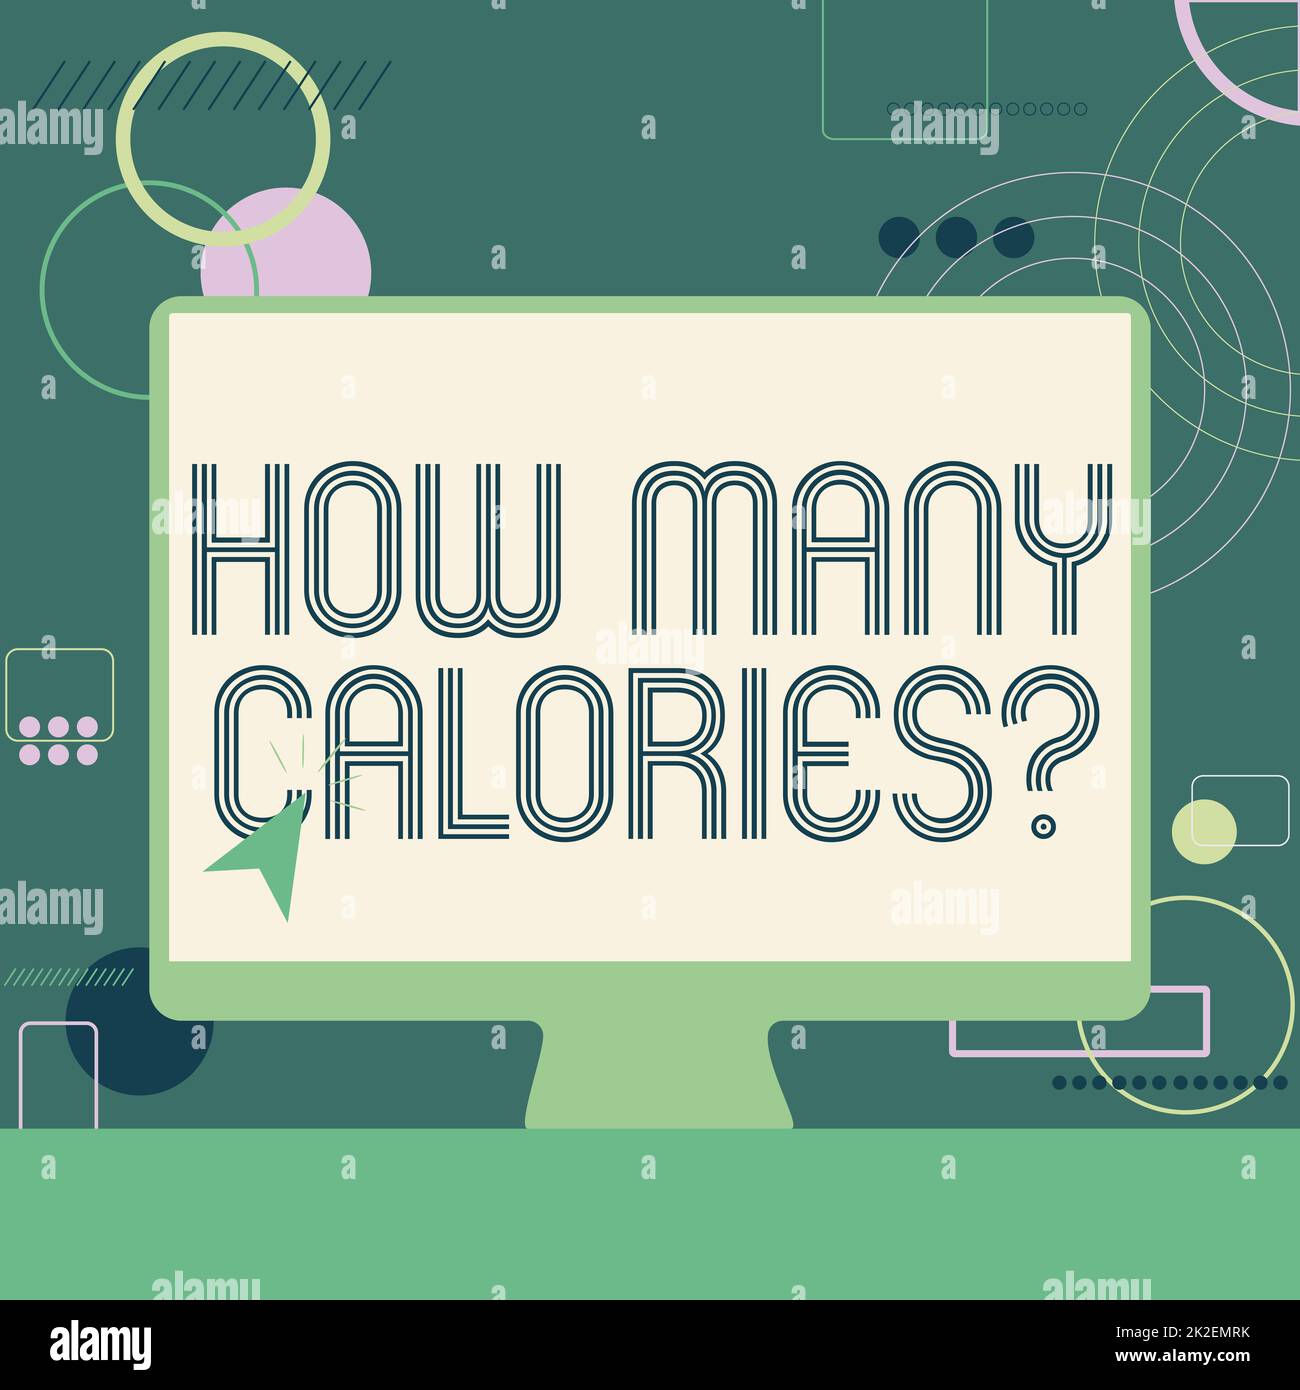 https://c8.alamy.com/comp/2K2EMRK/text-showing-inspiration-how-many-calories-question-word-written-on-asking-how-much-energy-our-body-could-get-from-it-illustration-of-cursor-in-blank-screen-monitor-searching-ideas-2K2EMRK.jpg